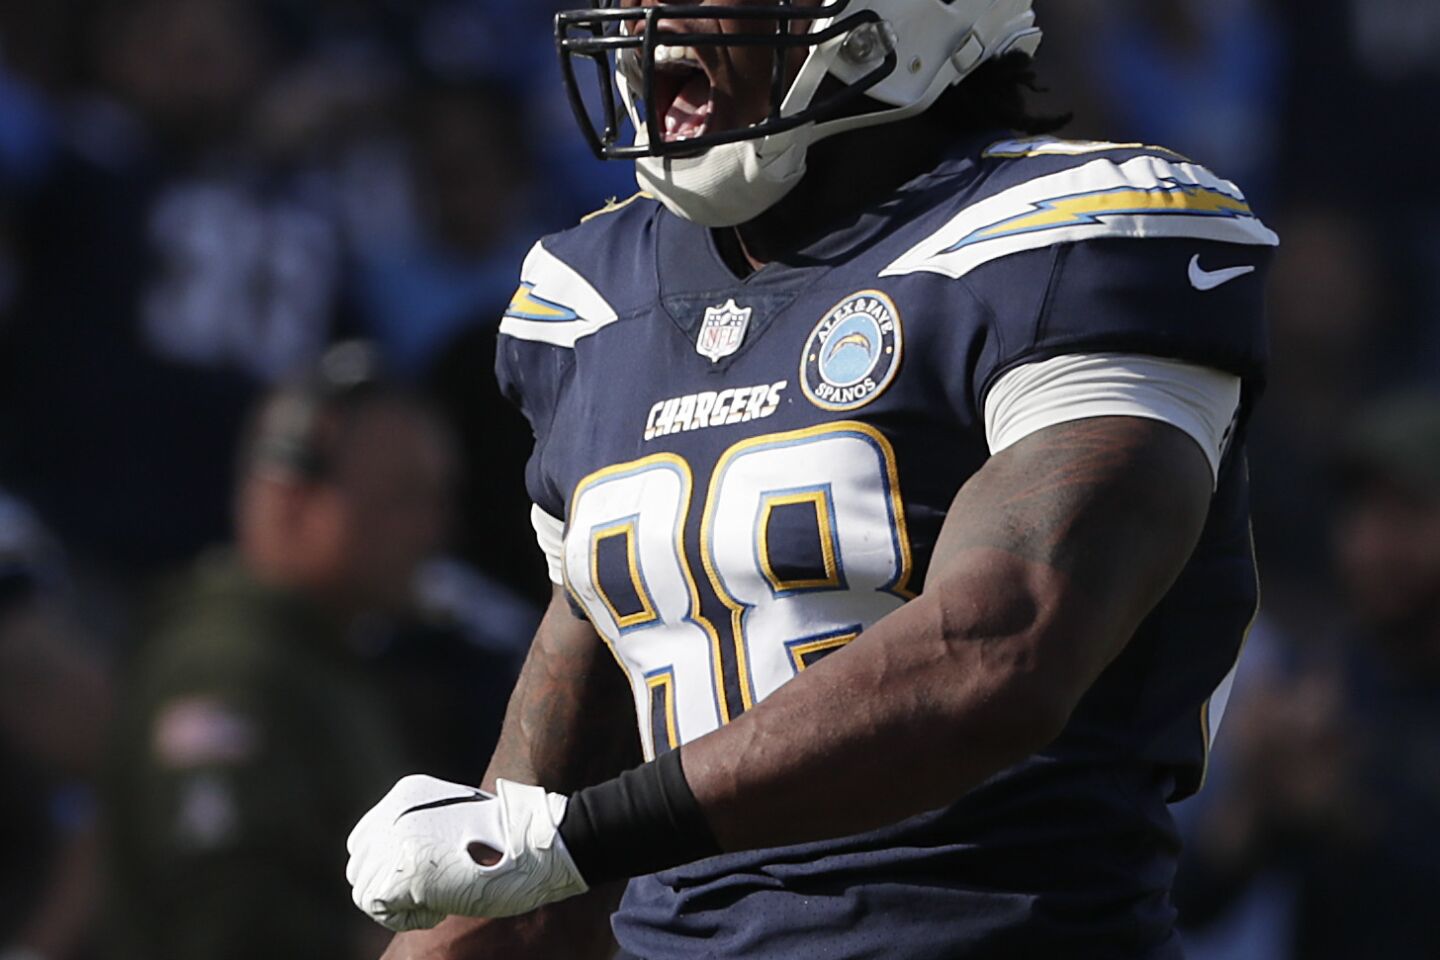 Chargers tight end Virgil Green yells out after catching a pass for a first down, keeping a first half drive alive against the Denver Broncos at Stubhub Center.